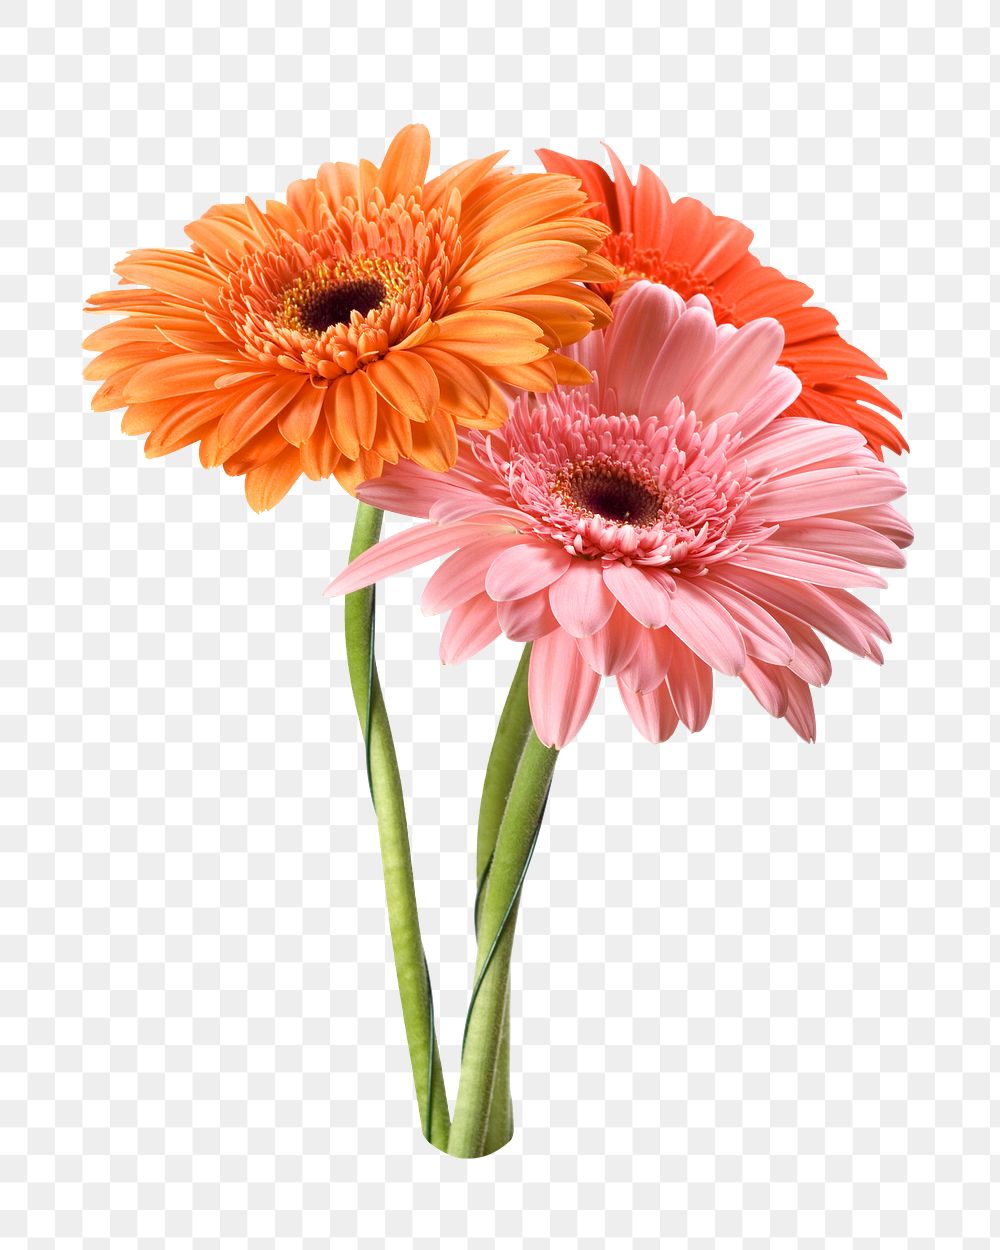 Transvaal daisy png sticker, transparent background